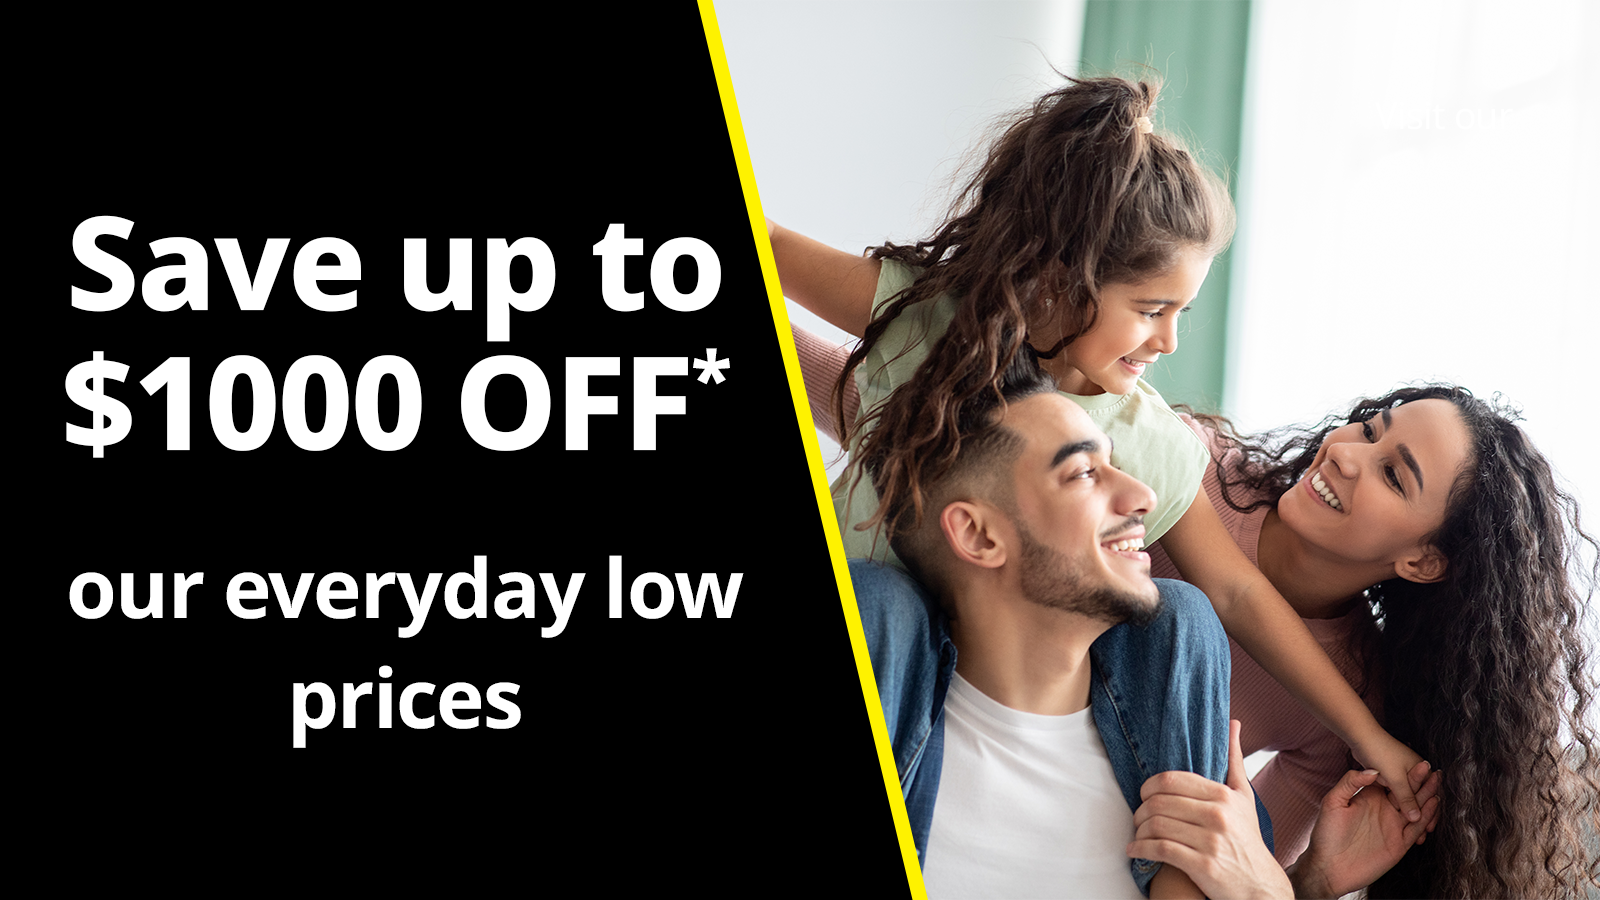 Save up to $1000 OFF*